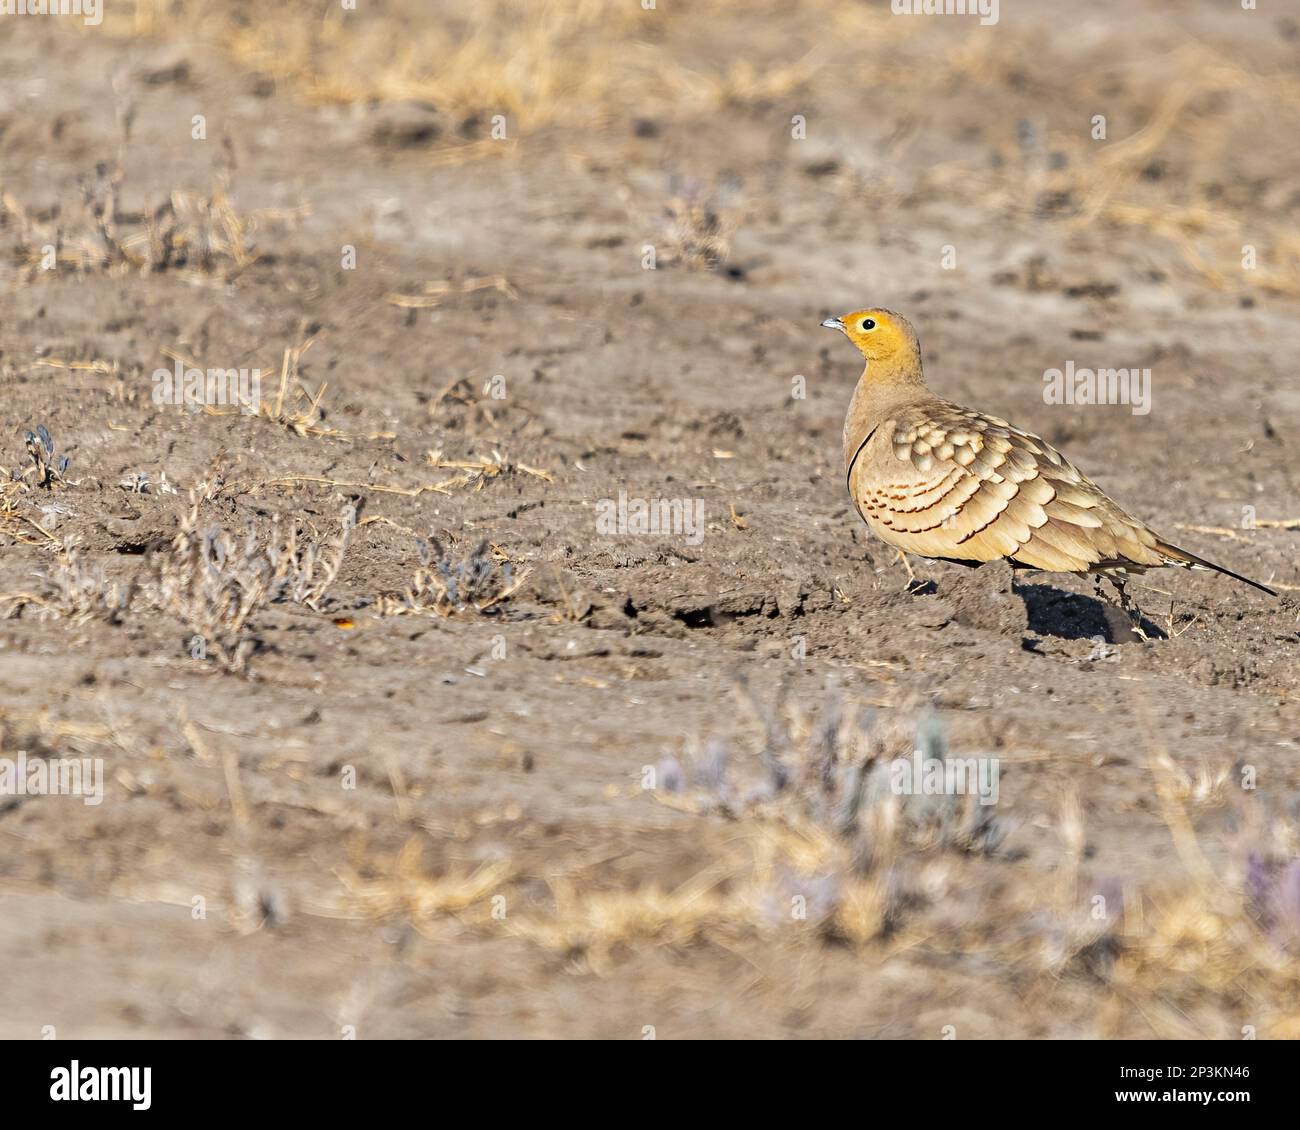 A Sand Grouse looking back to camera in desert Stock Photo